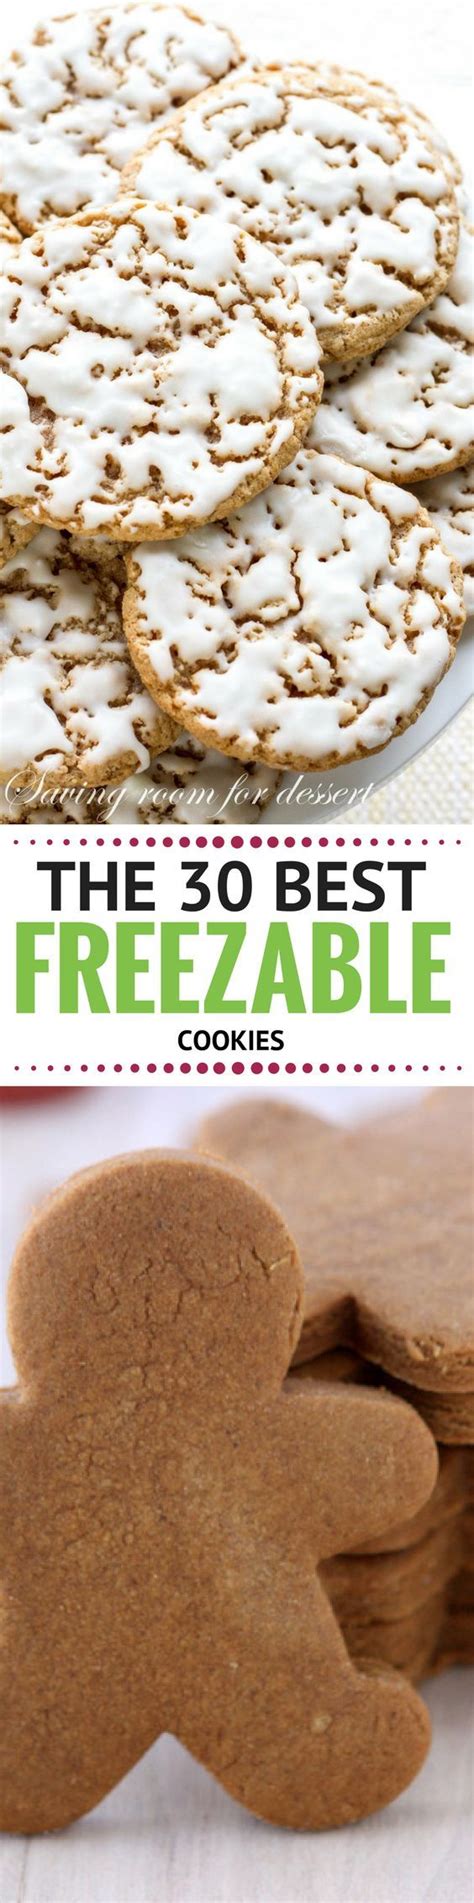 Easy cookie recipes don't get better than this. THE 30 BEST FREEZABLE COOKIES TO KEEP YOU SANE DURING THE HOLIDAYS! ~ theviewfromgreatisland.c ...